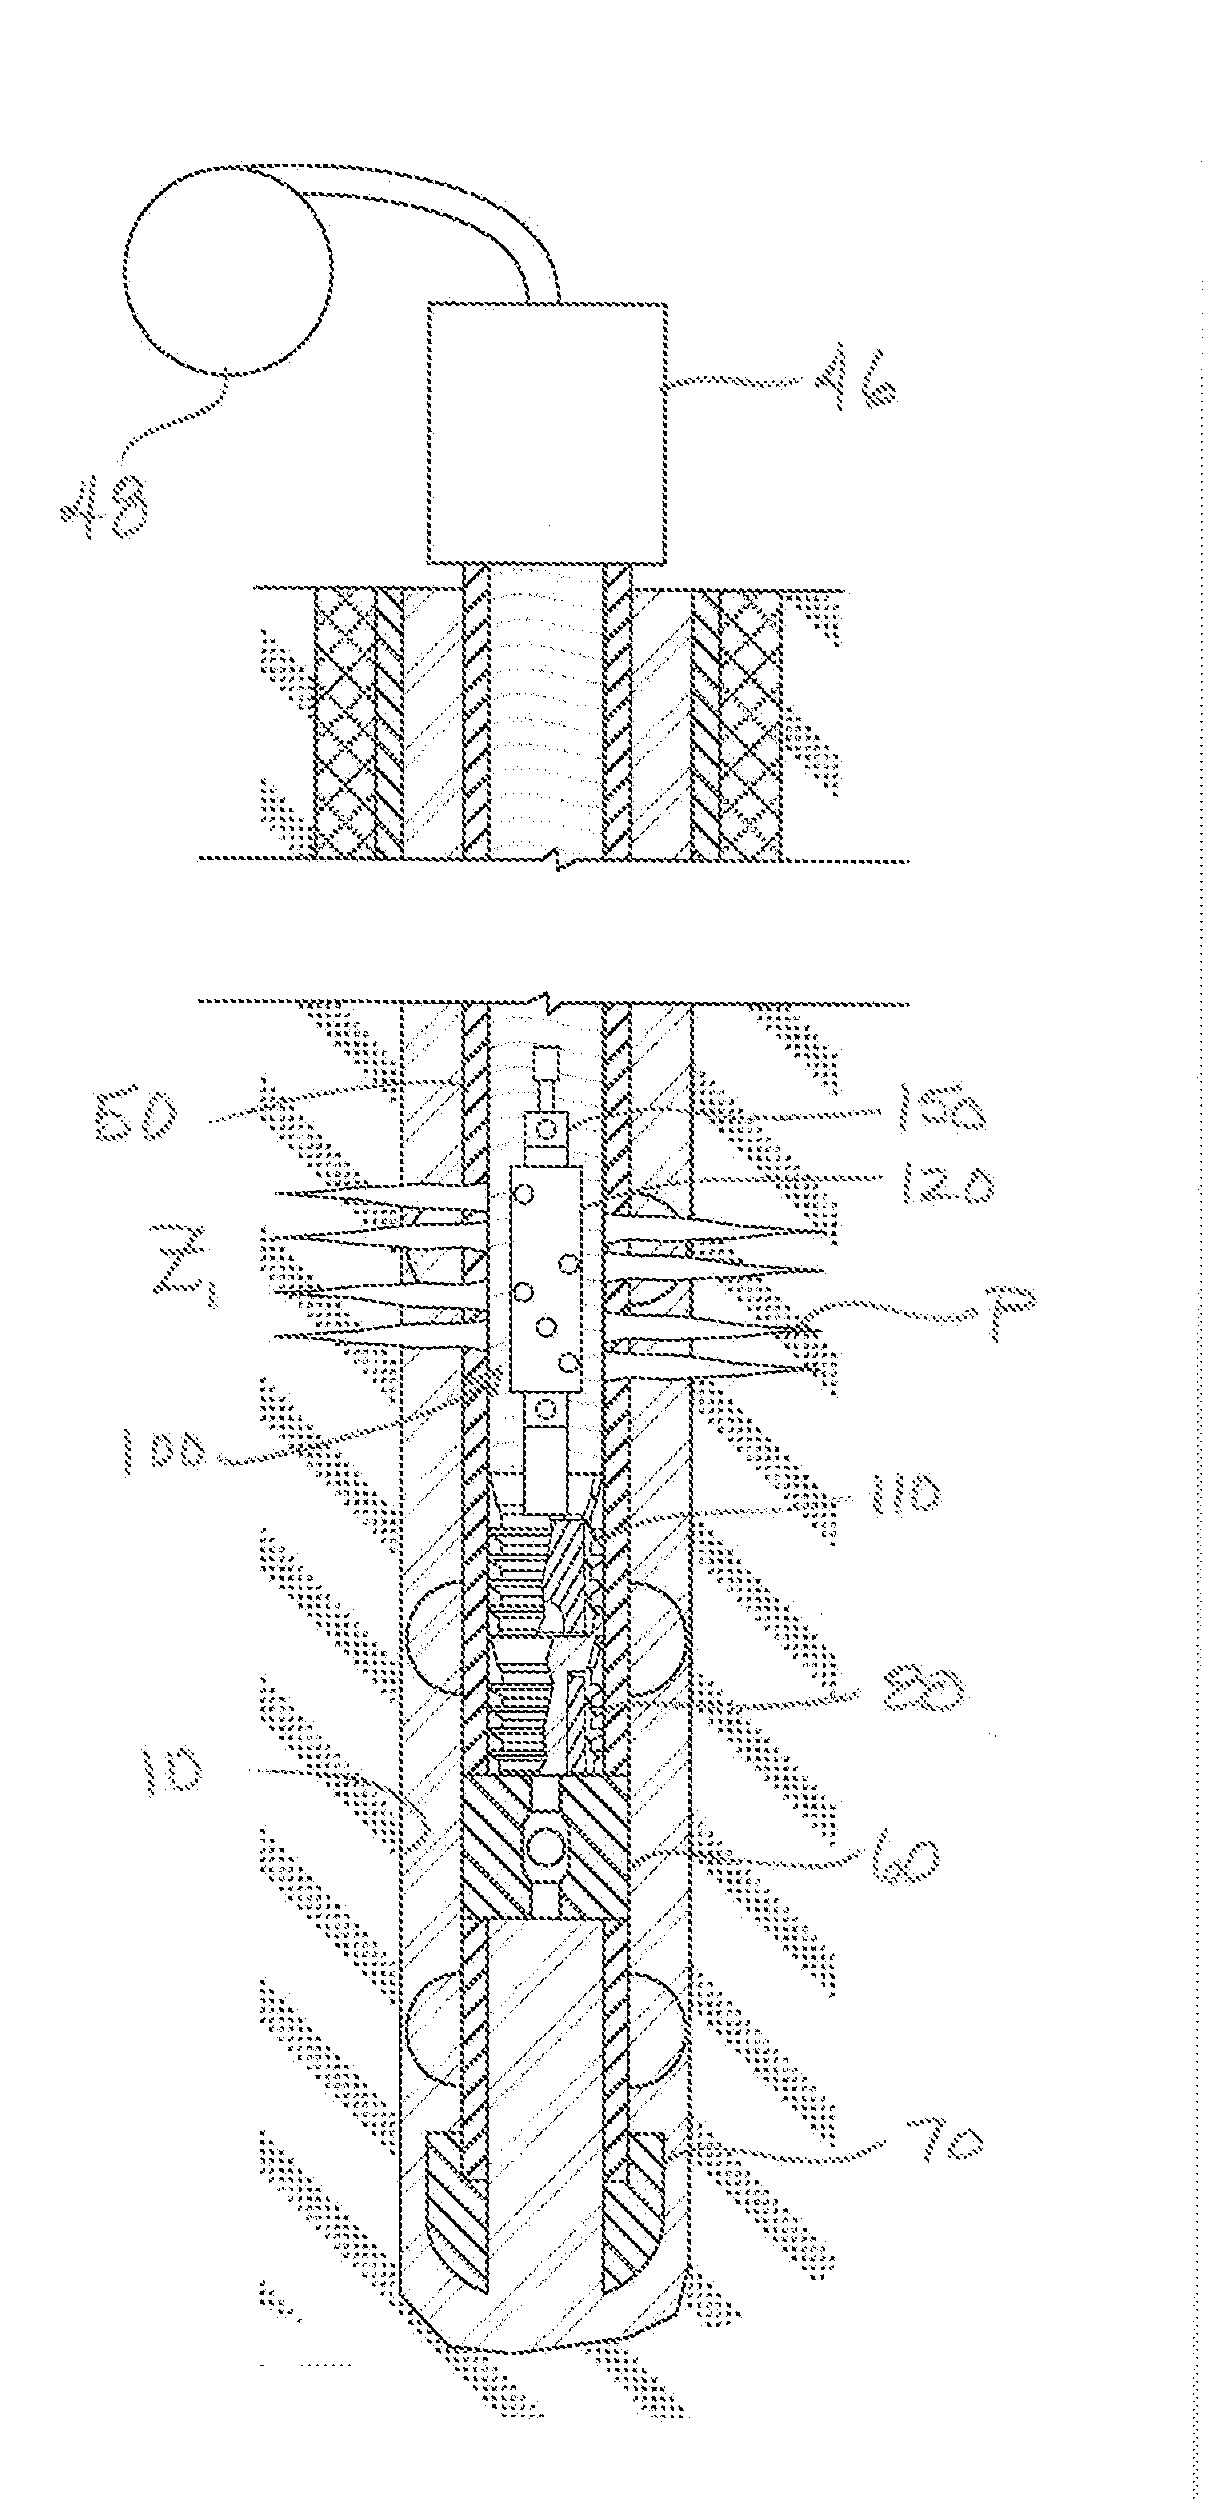 Plug and Gun Apparatus and Method for Cementing and Perforating Casing